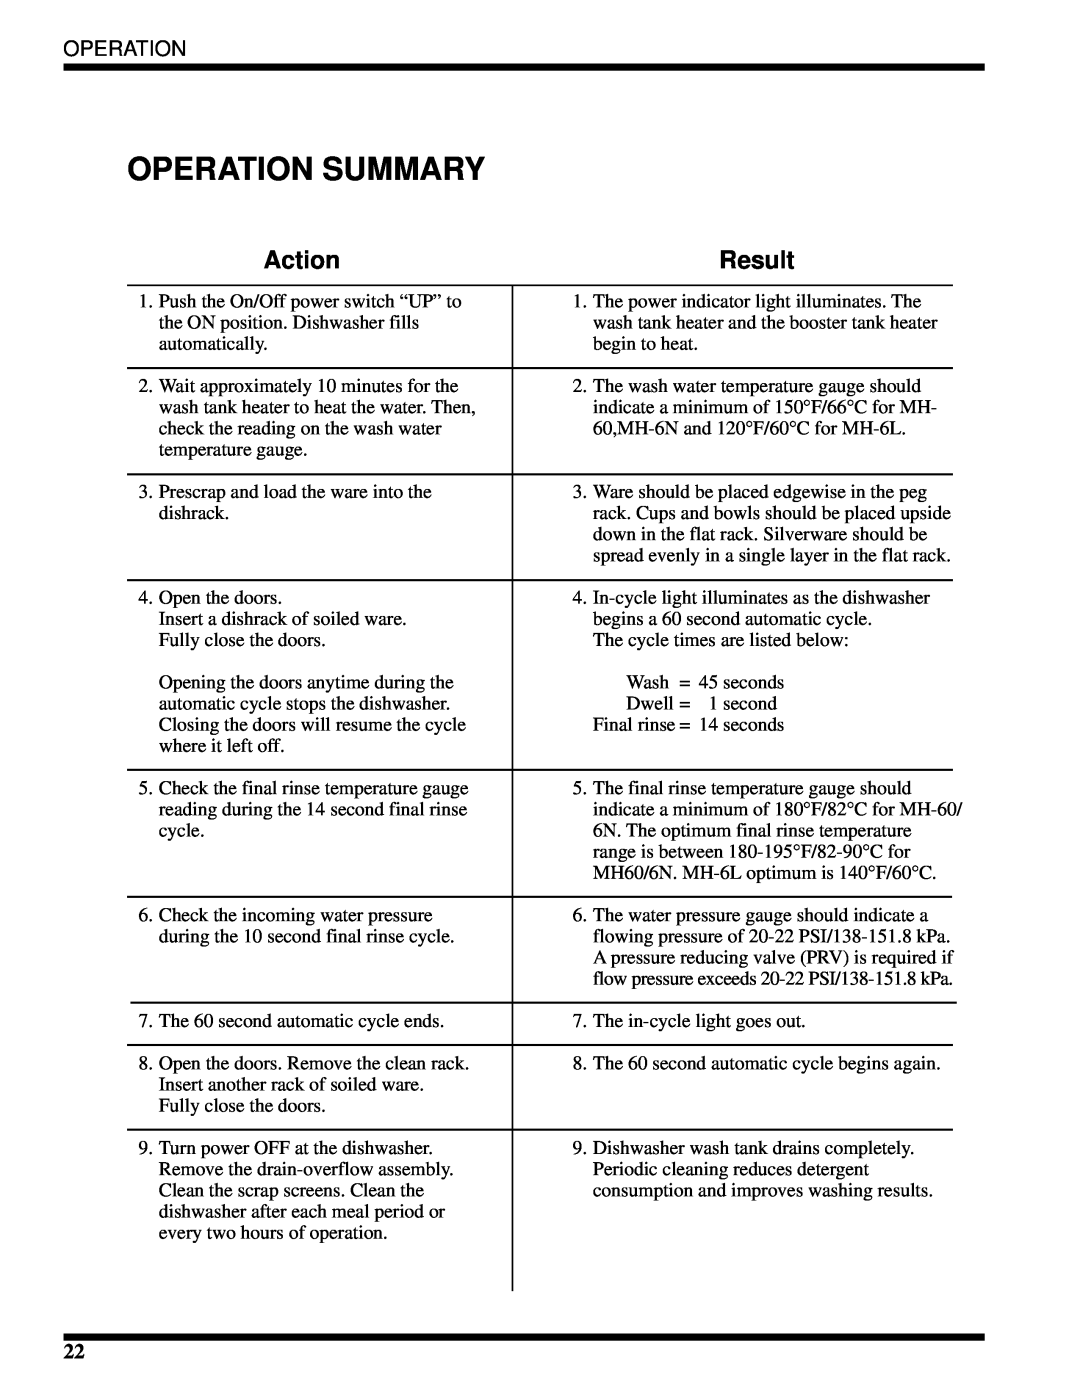 Moyer Diebel MH-6NM3, MH-6LM3, MH-60M3 technical manual Operation Summary, Action, Result 